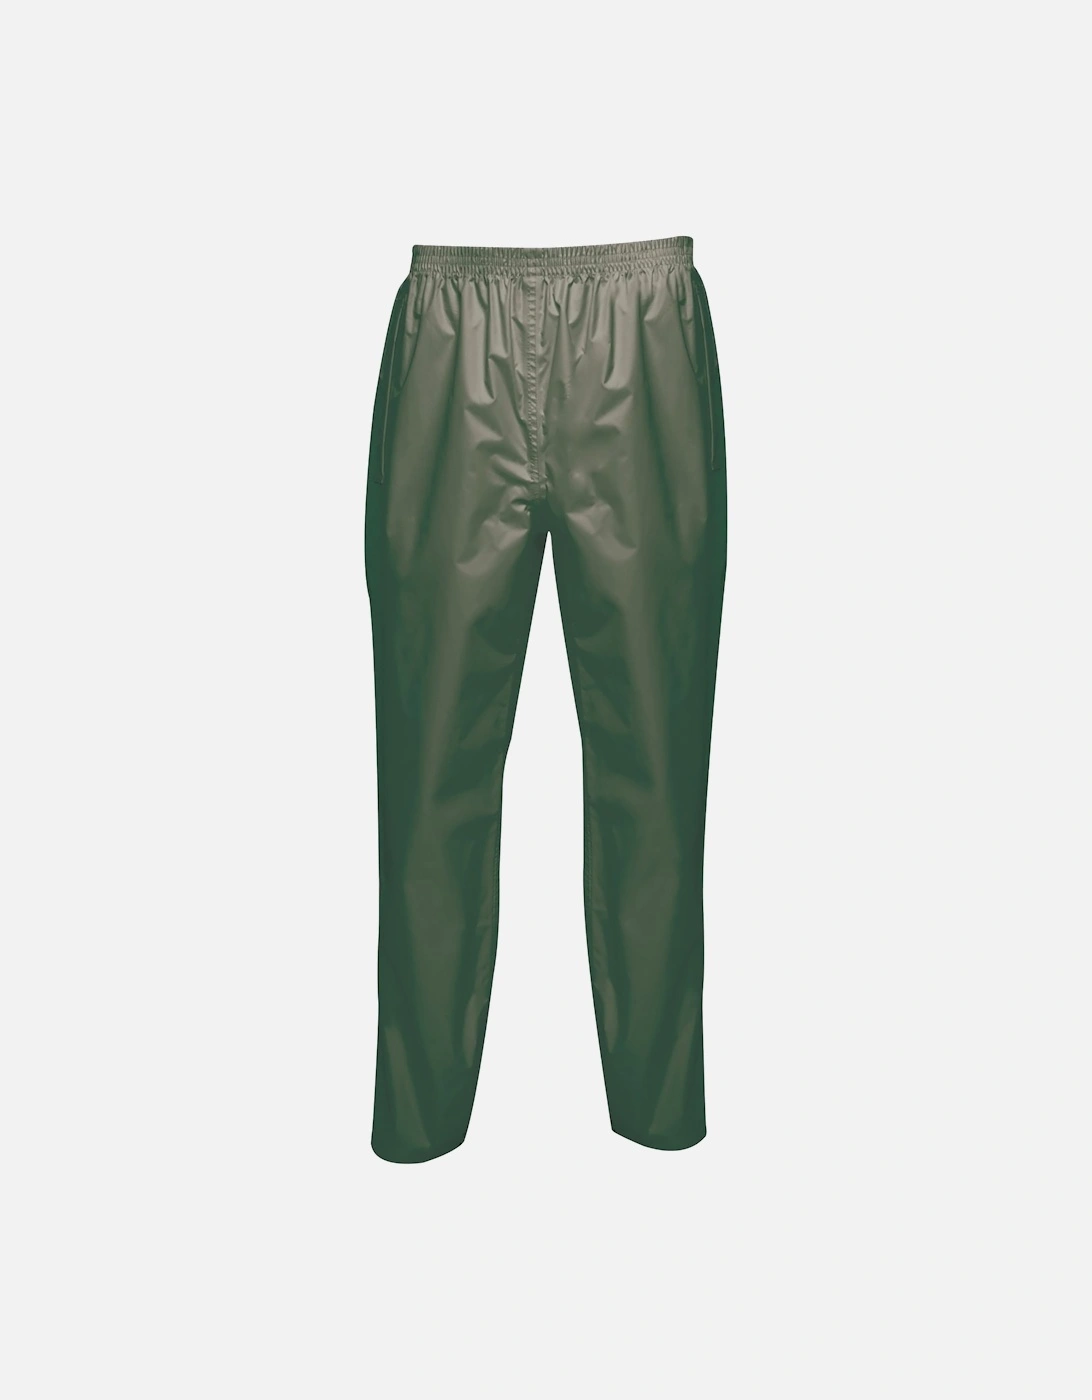 Mens Pro Packaway Overtrousers, 5 of 4